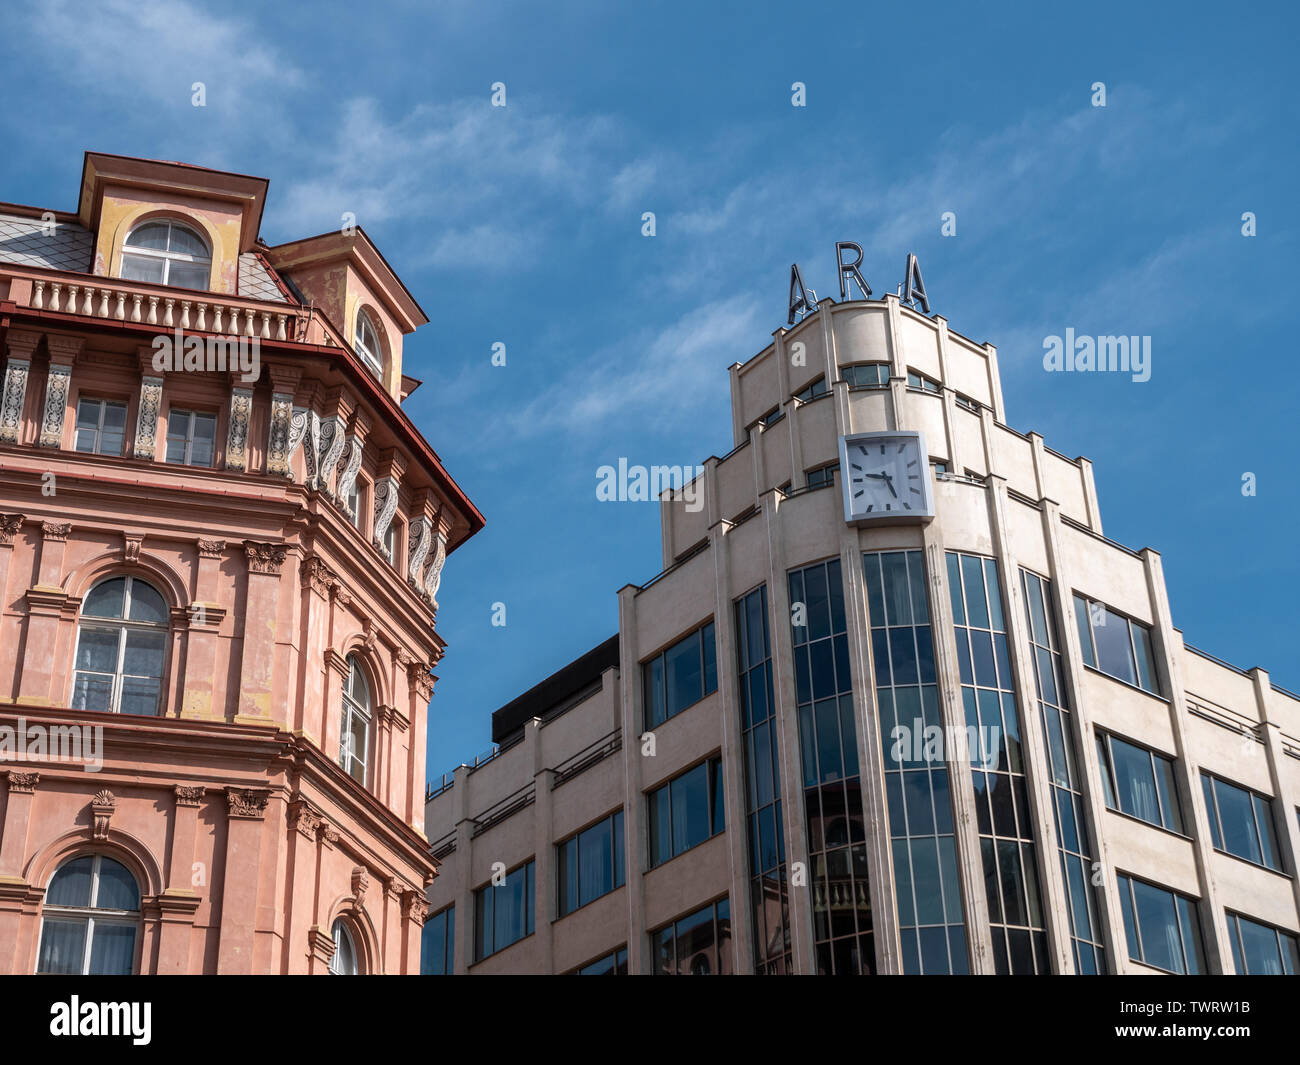 Prague, Czech Republic - June 10 2019: Classic and Modern, Old and New Architecture Meeting in Prague, Czech Republic. Modernist ARA building and its classicist neighbor. A Concept for Changes or Difference in Archtectural Style. Stock Photo